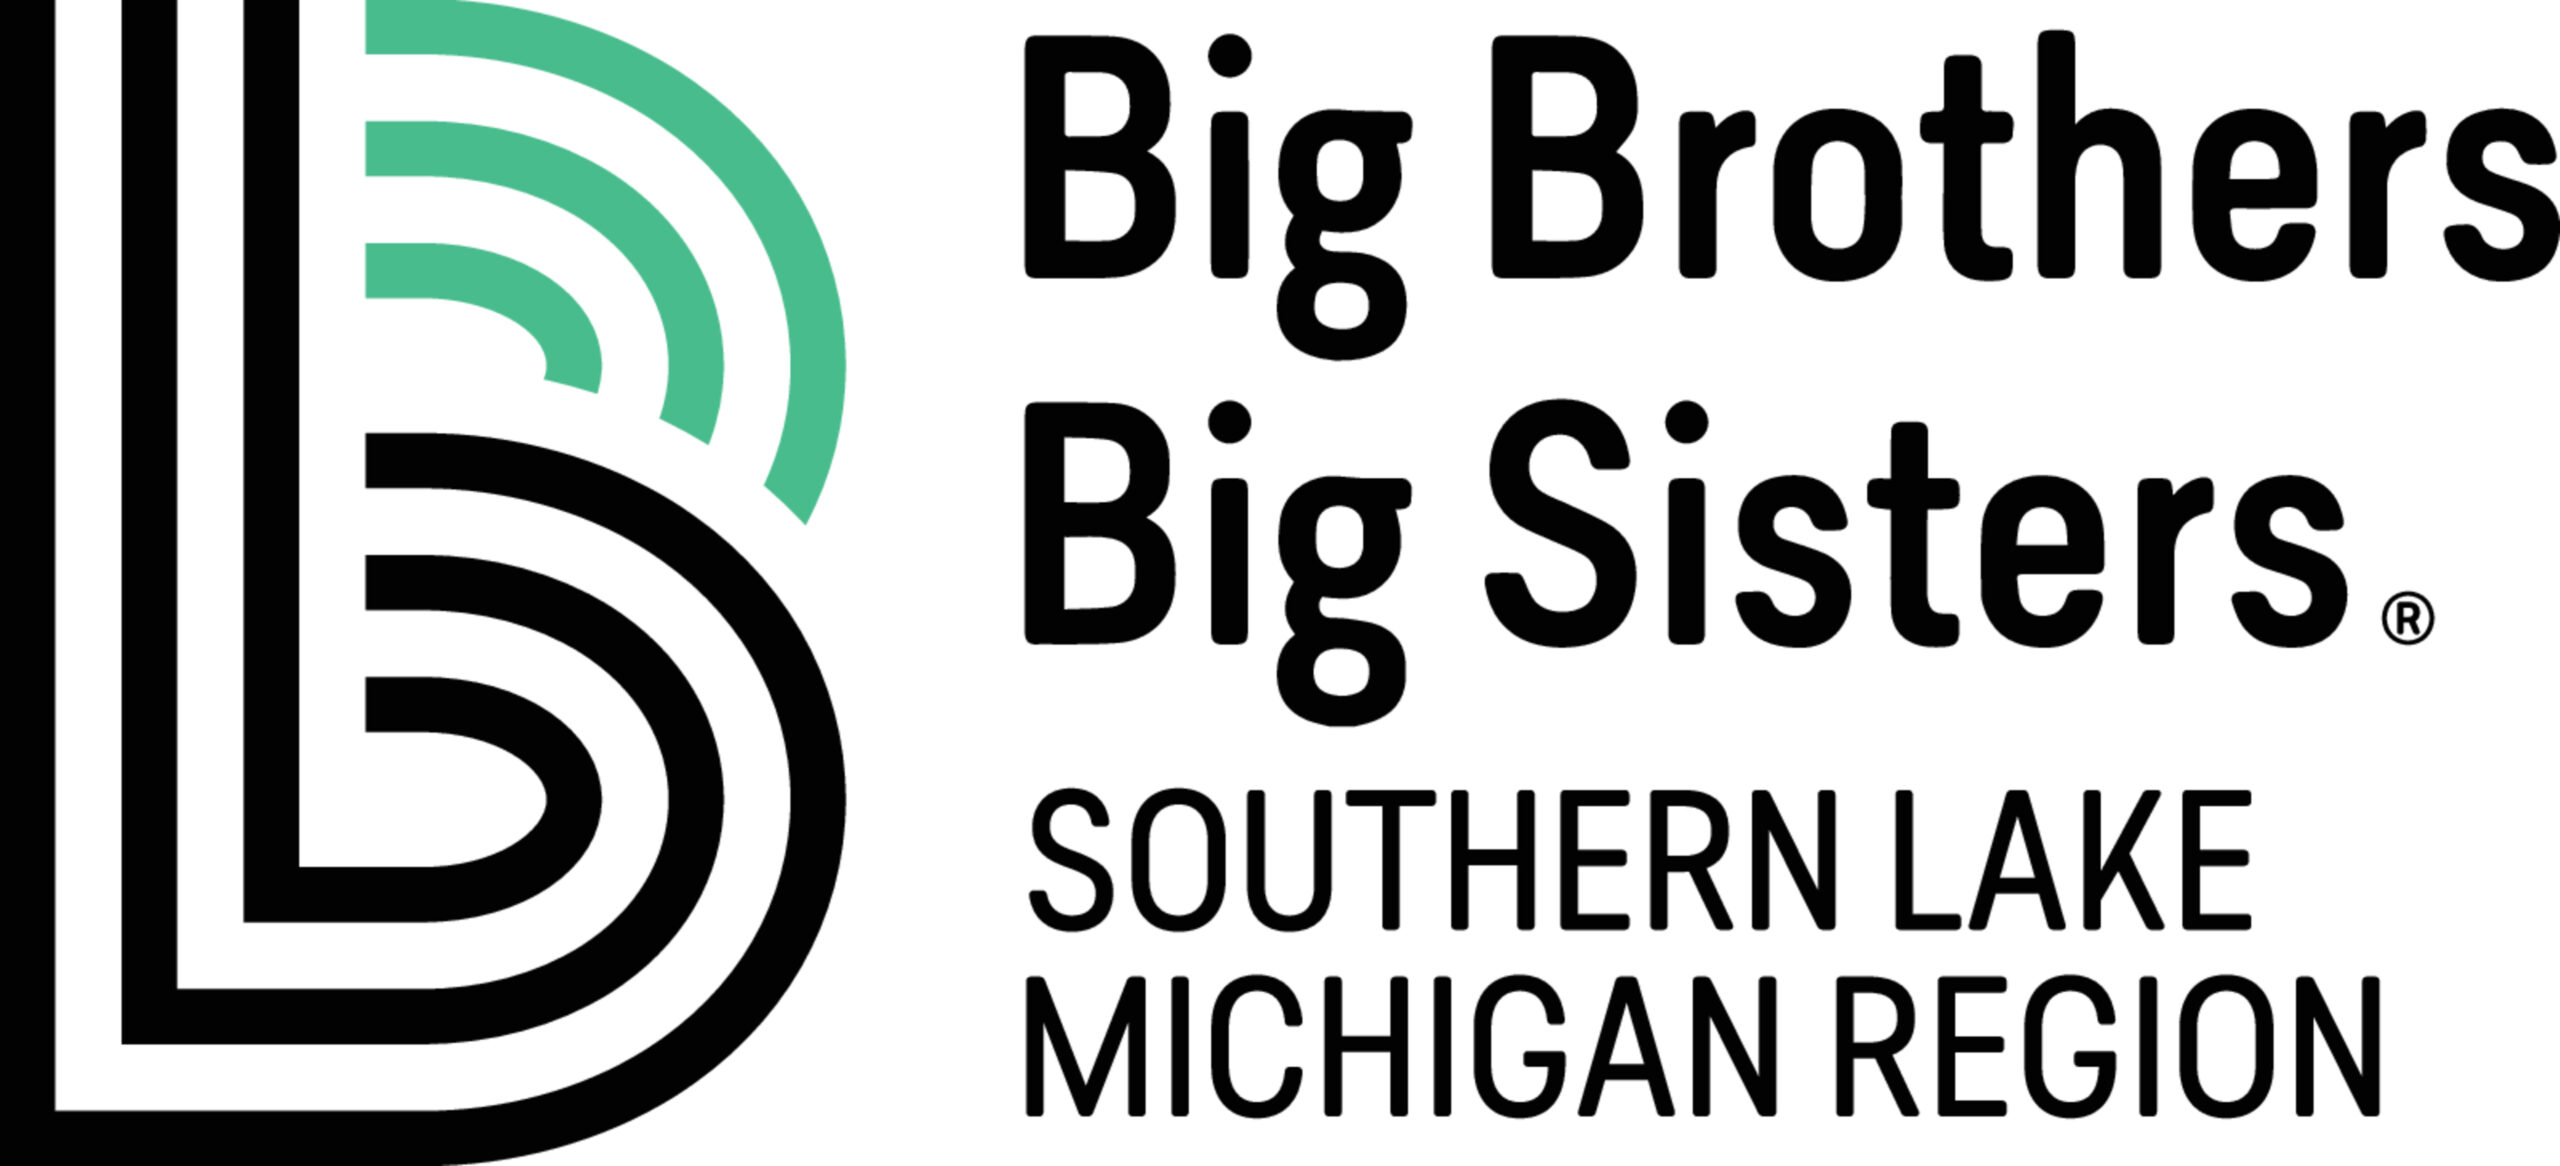 The Big Brothers Big Sisters logo in black and green text.